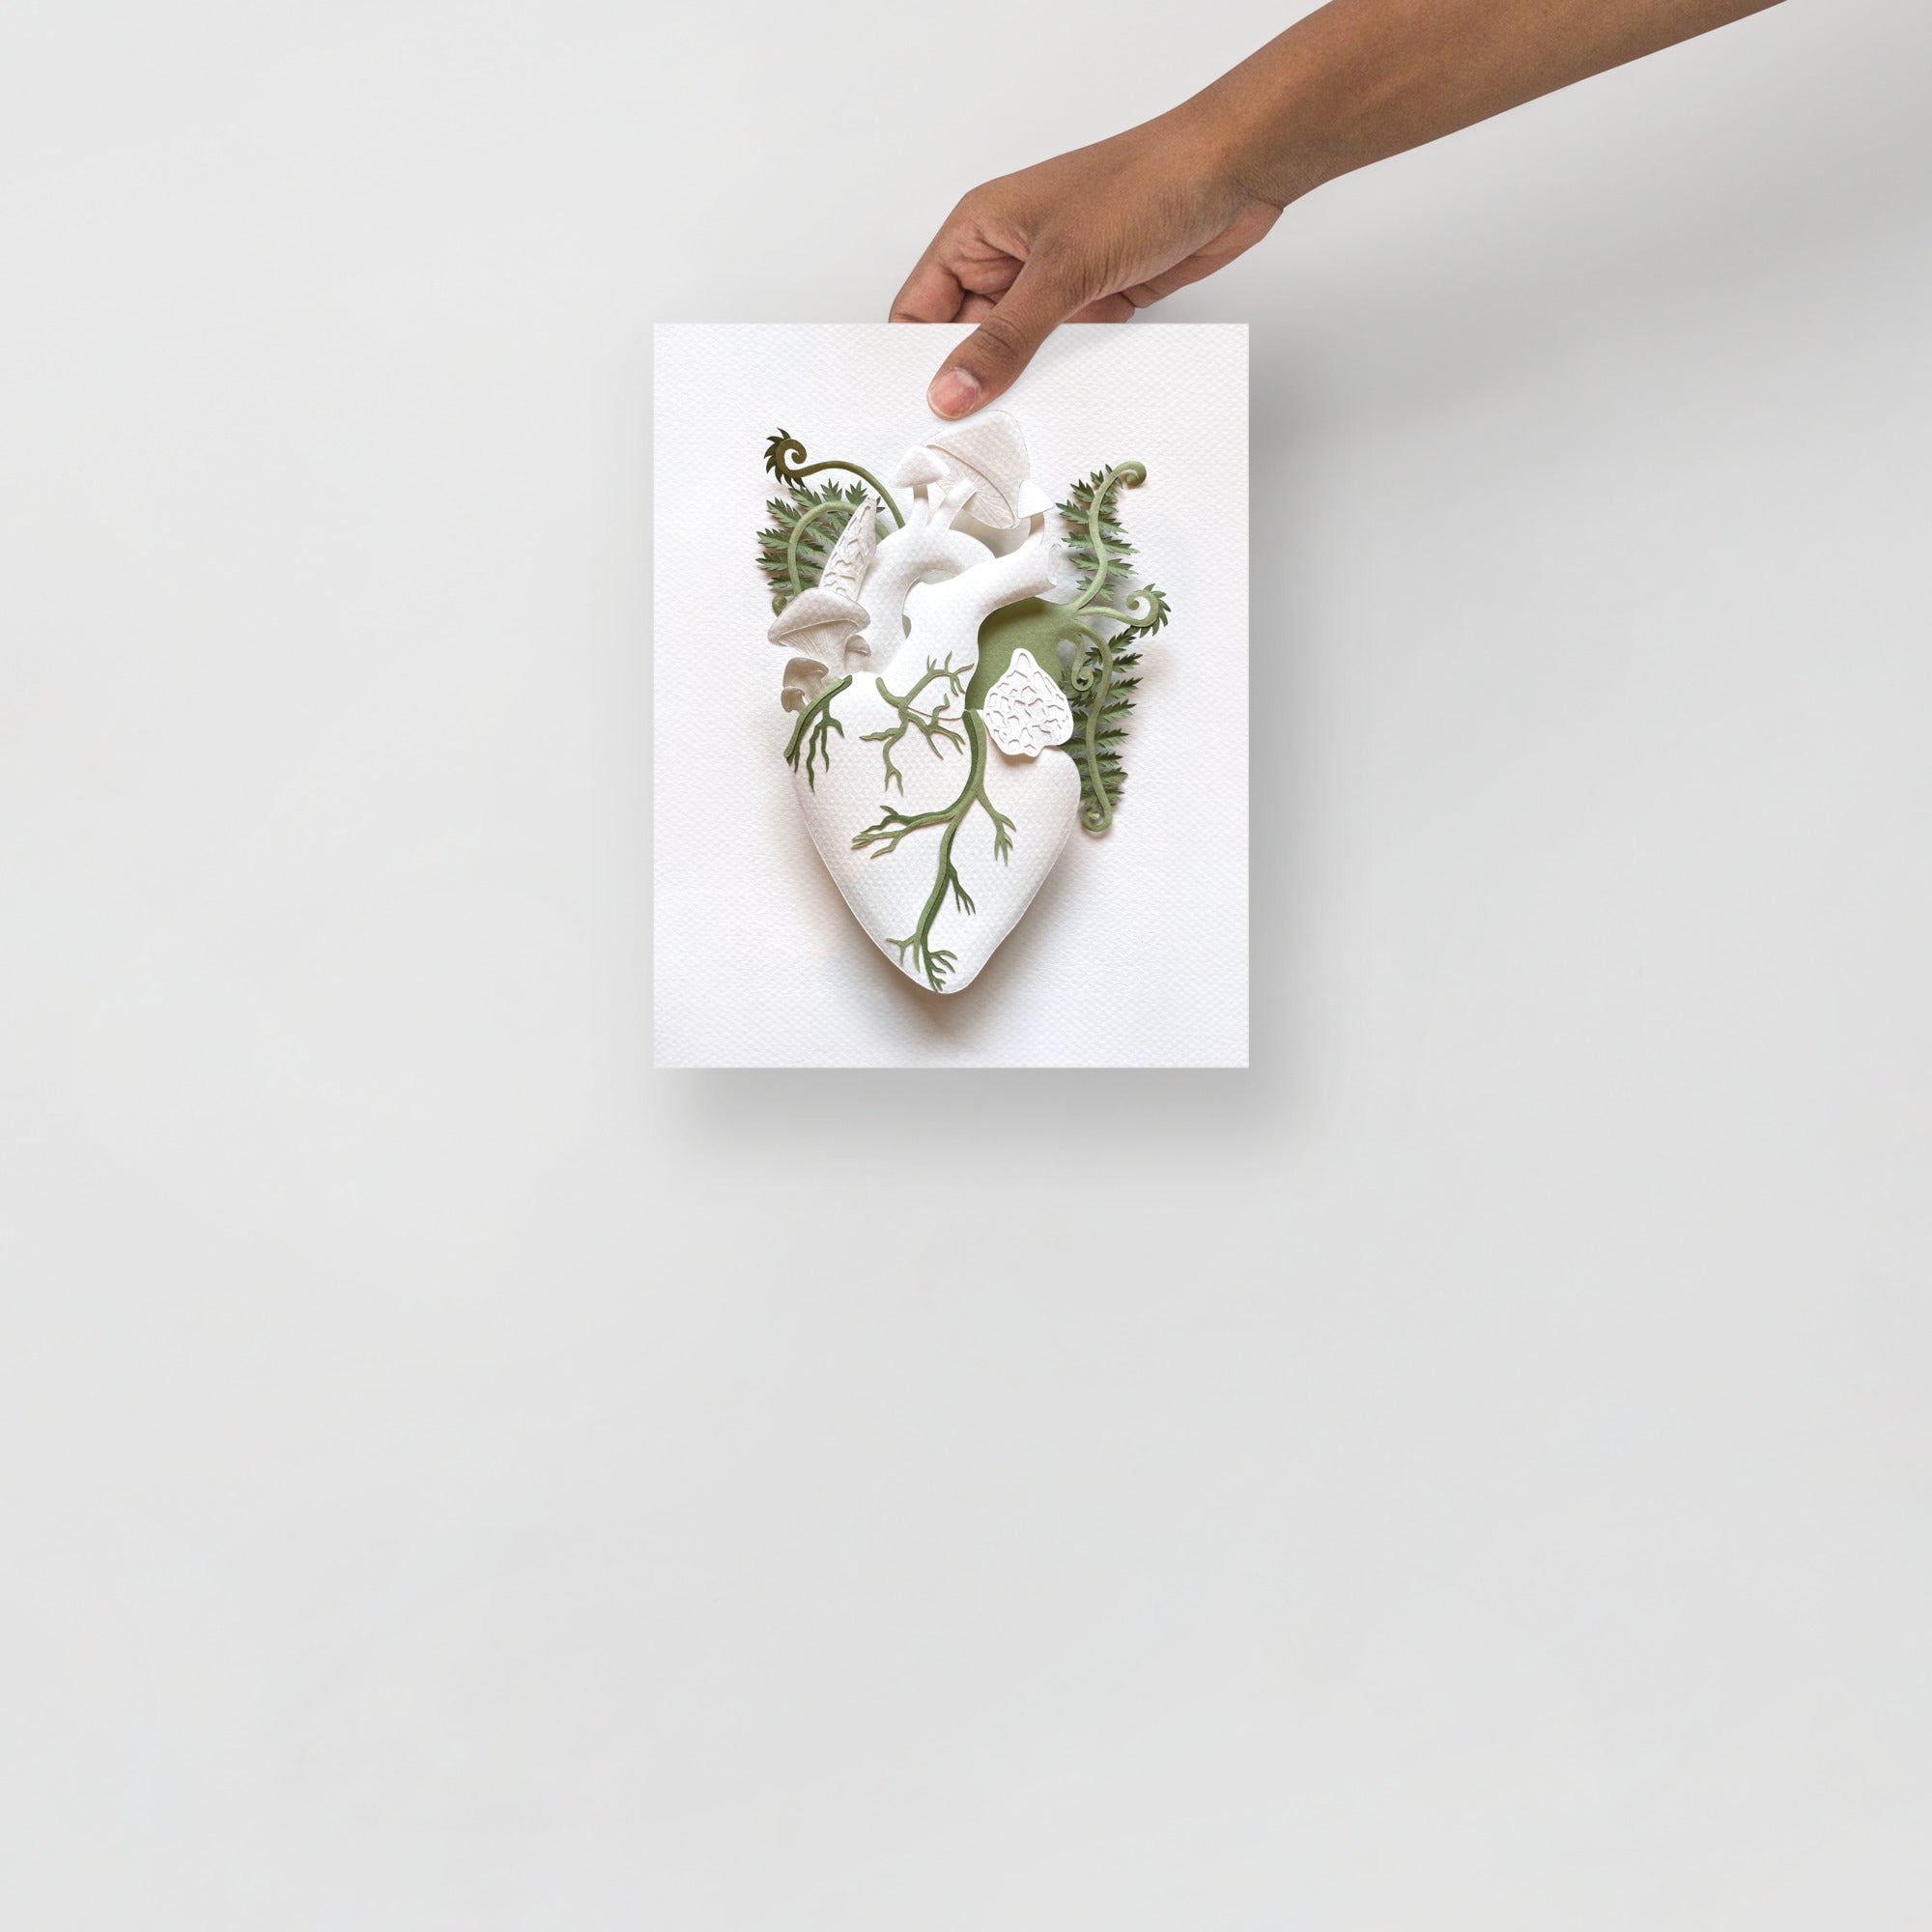 anatomical heart with mushrooms and ferns made of hand cut paper